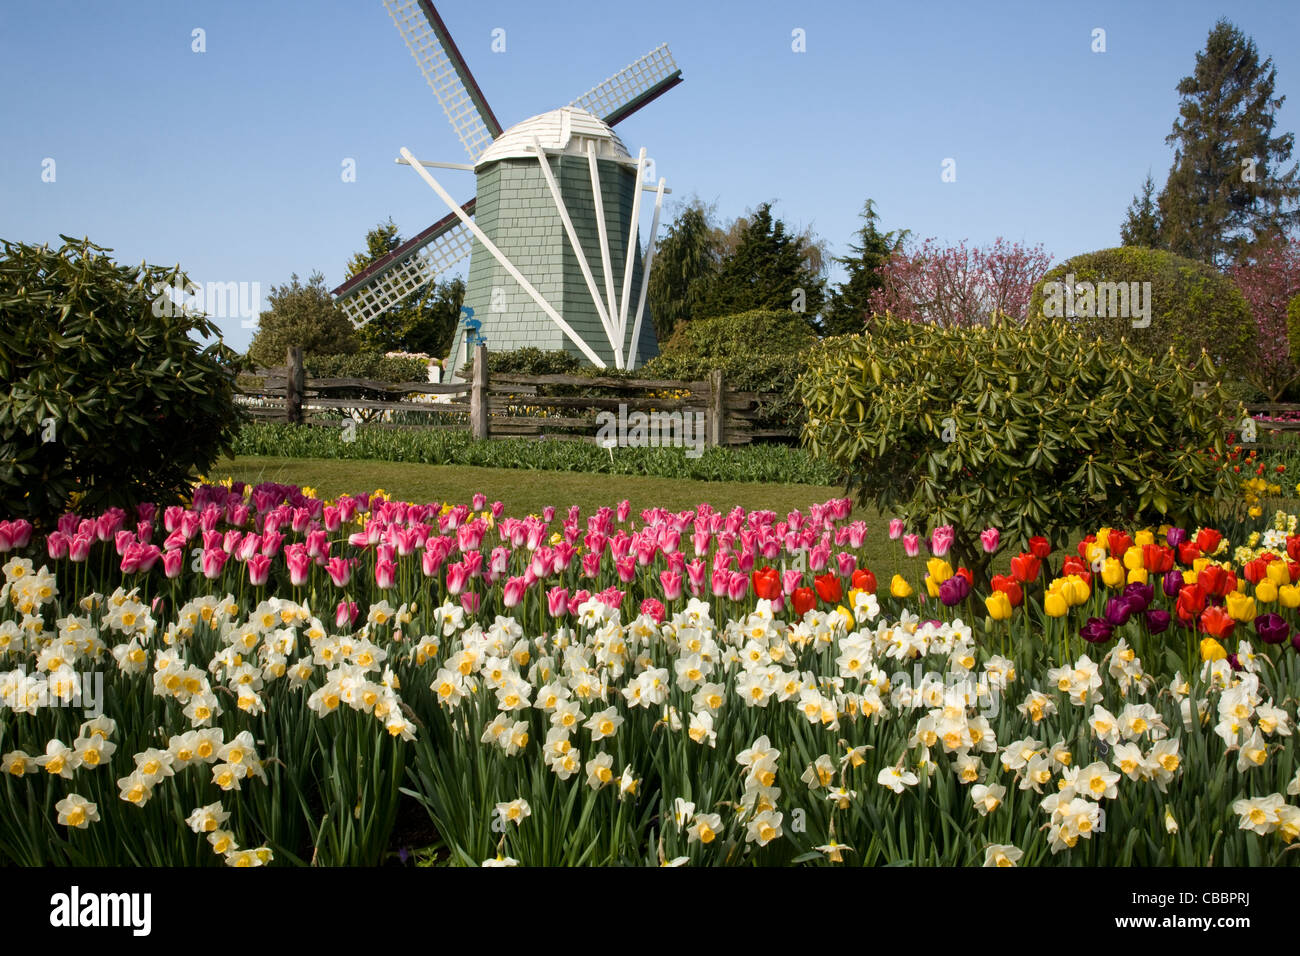 WASHINGTON - Tulips and daffodils blooming blooming naer the Windmill at Roozengaarde Flowers and Bulb garden. Stock Photo